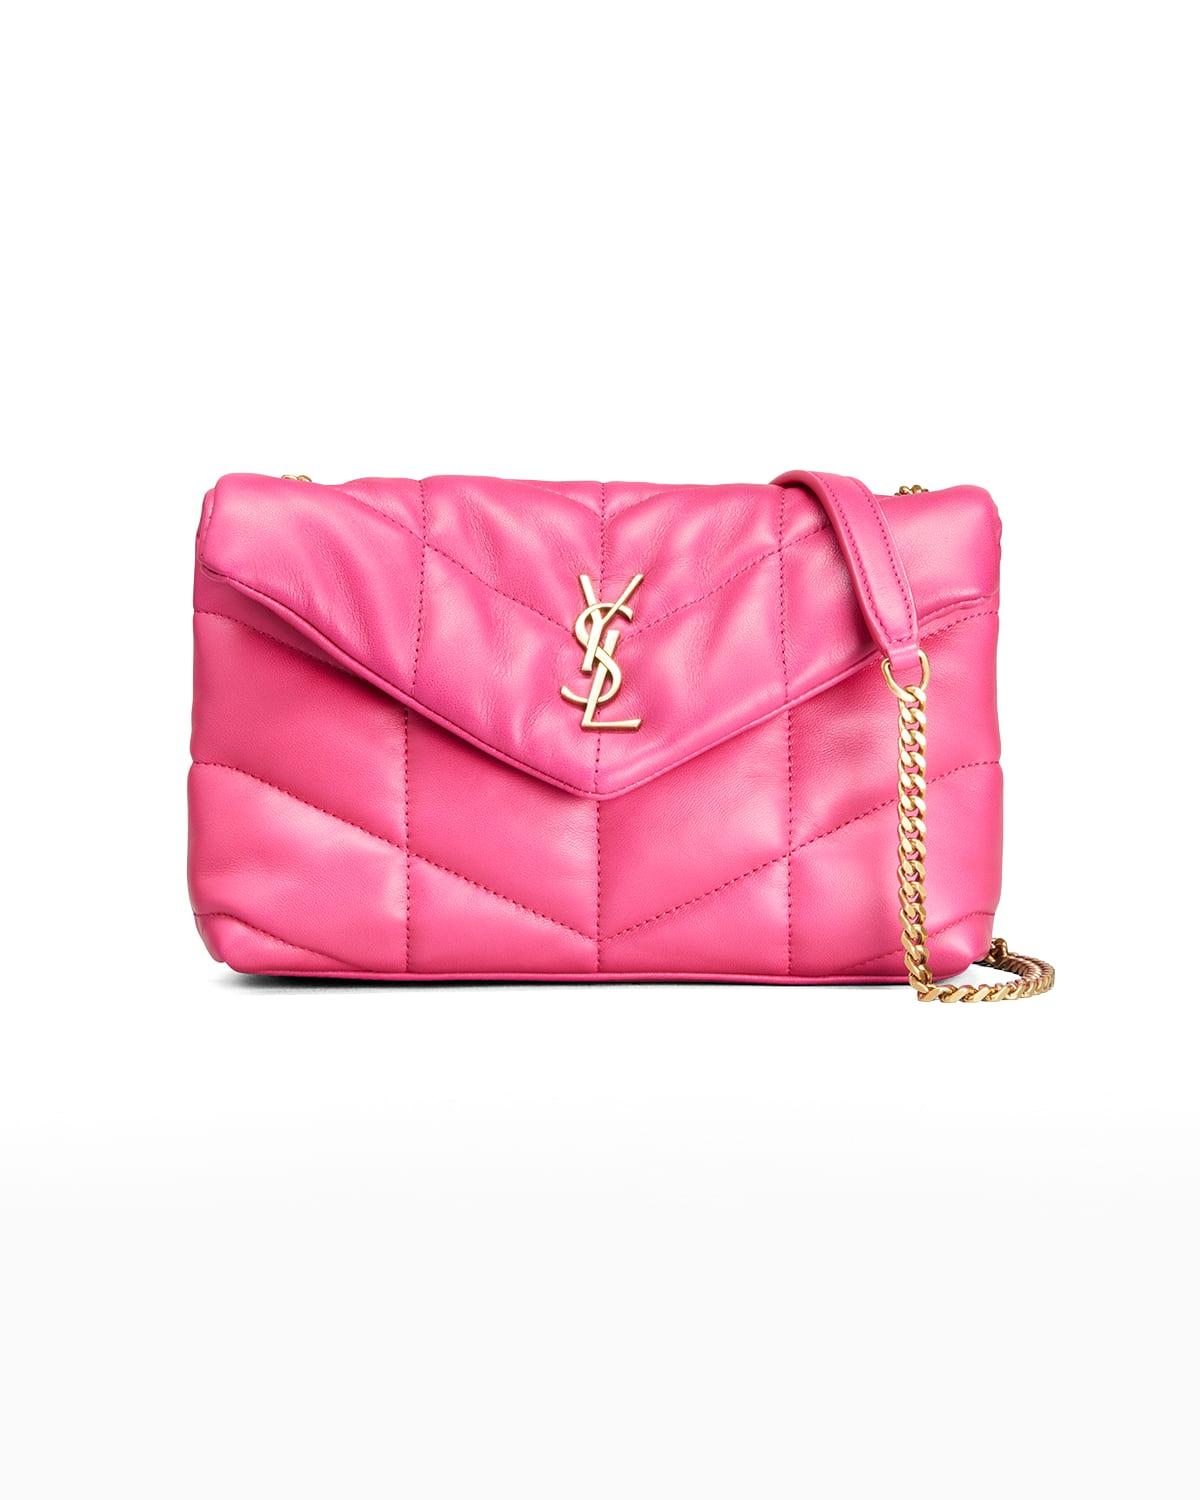 Saint Laurent Loulou Toy Ysl Puffer Quilted Lambskin Crossbody Bag in ...